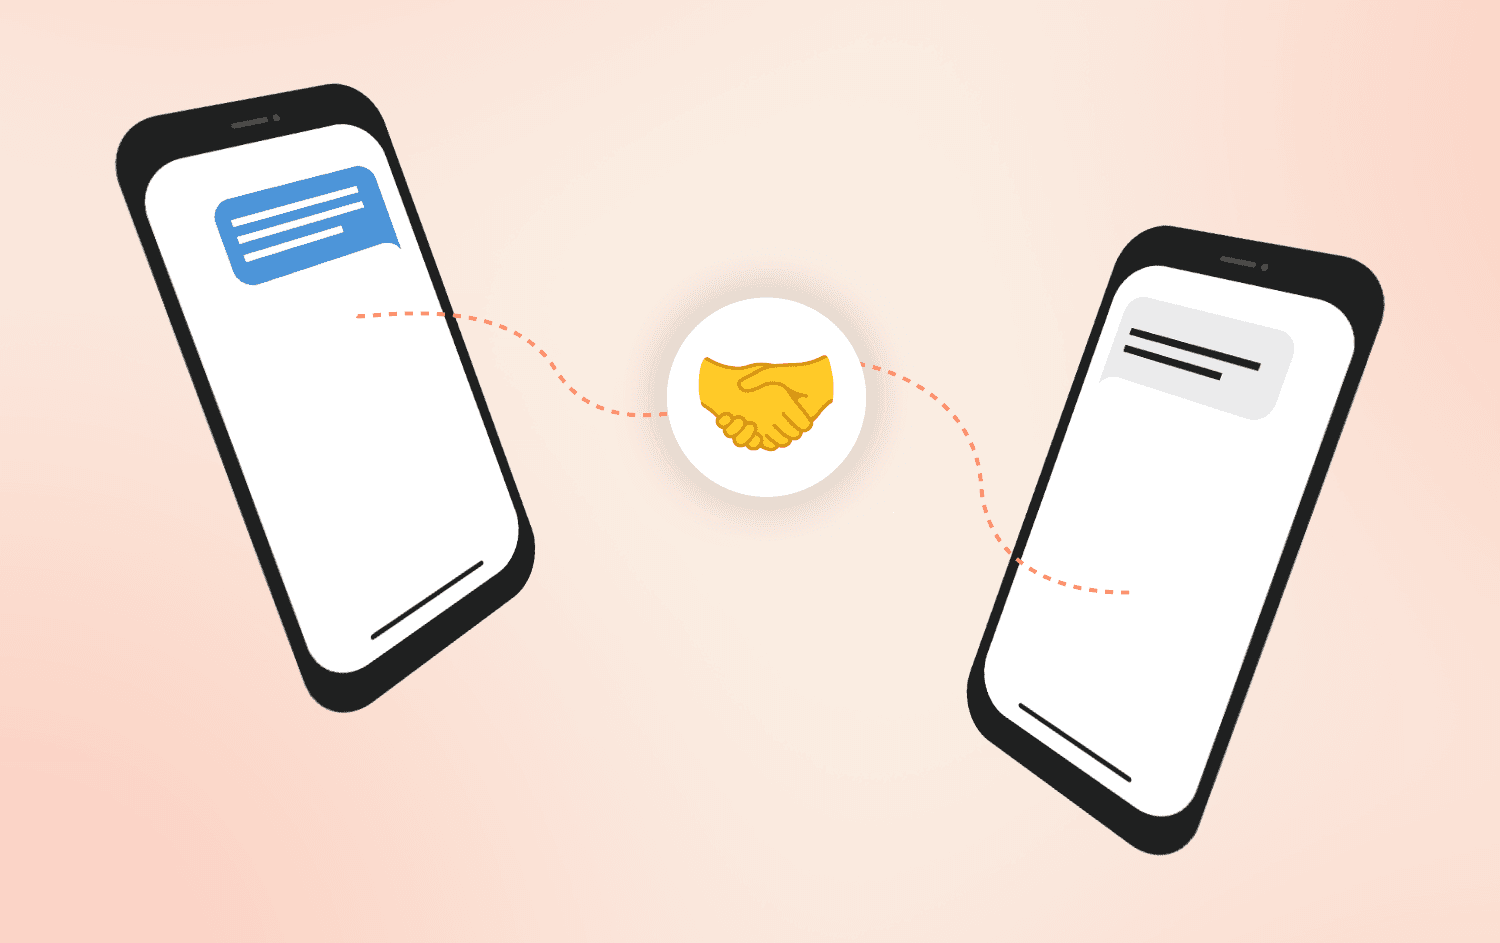 Cartoon graphic of two smartphones side by side connected by a glowing bar. In the middle of the bar is a handshake emoji